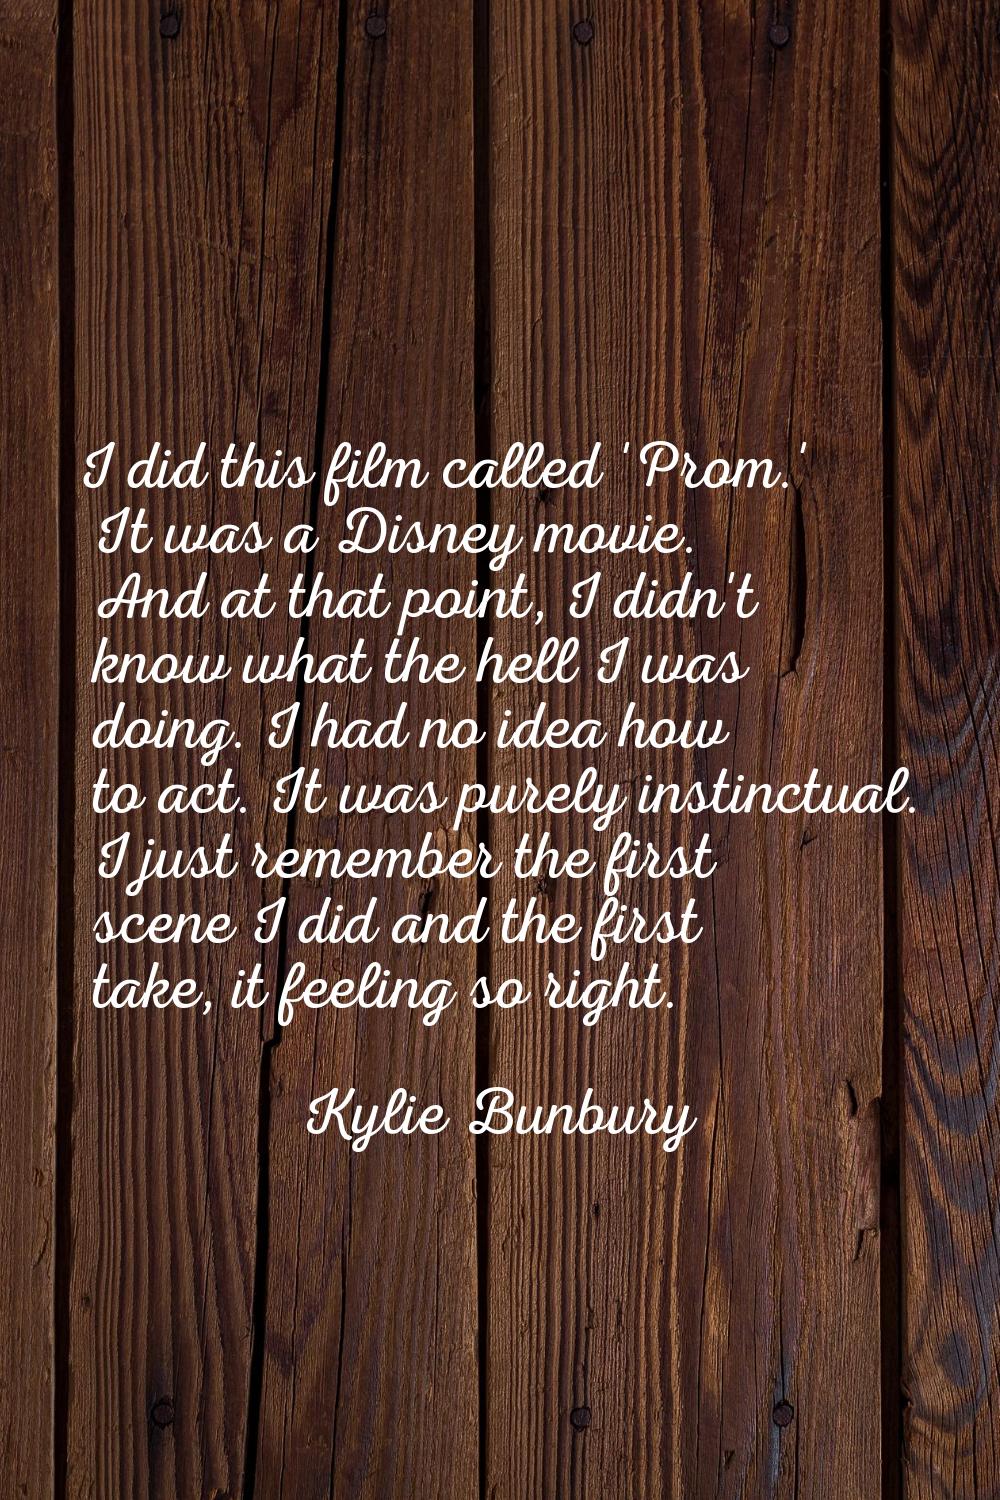 I did this film called 'Prom.' It was a Disney movie. And at that point, I didn't know what the hel